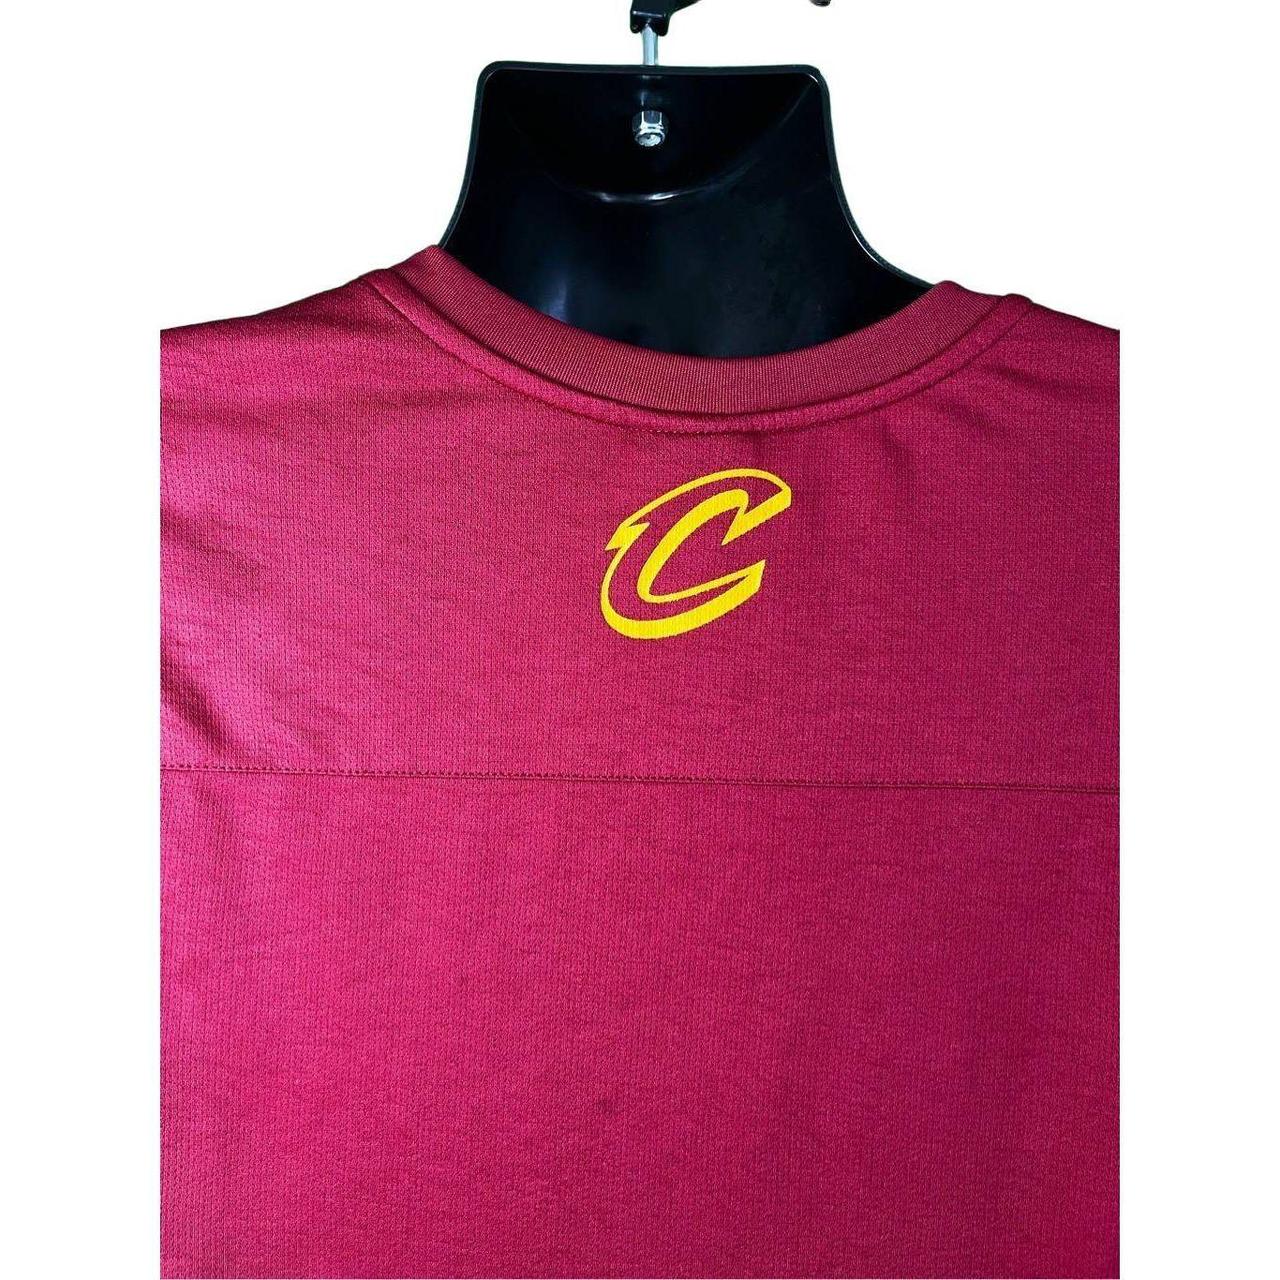 NWT- Cleveland cavaliers NBA store - Depop